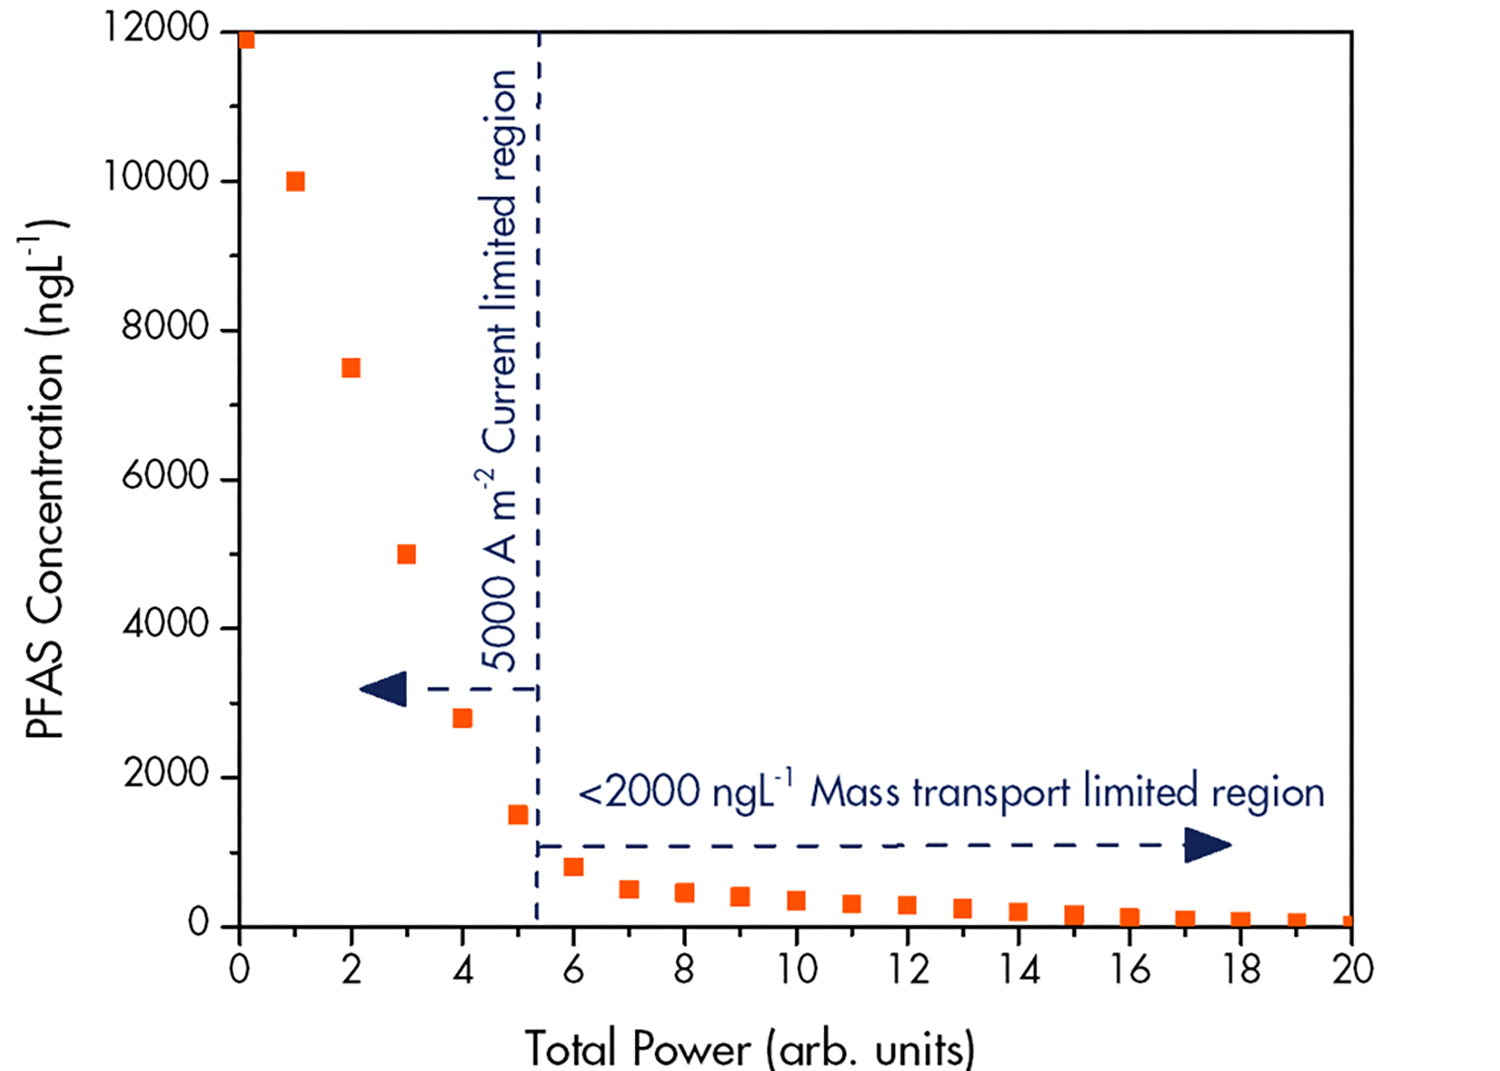 Curve of PFAS reduction as a function of total power. At concentration levels > 2,000 ngL-1, the reduction rate is current limited; at levels < 2,000 ngL-1, the reduction is mass-transport limited.